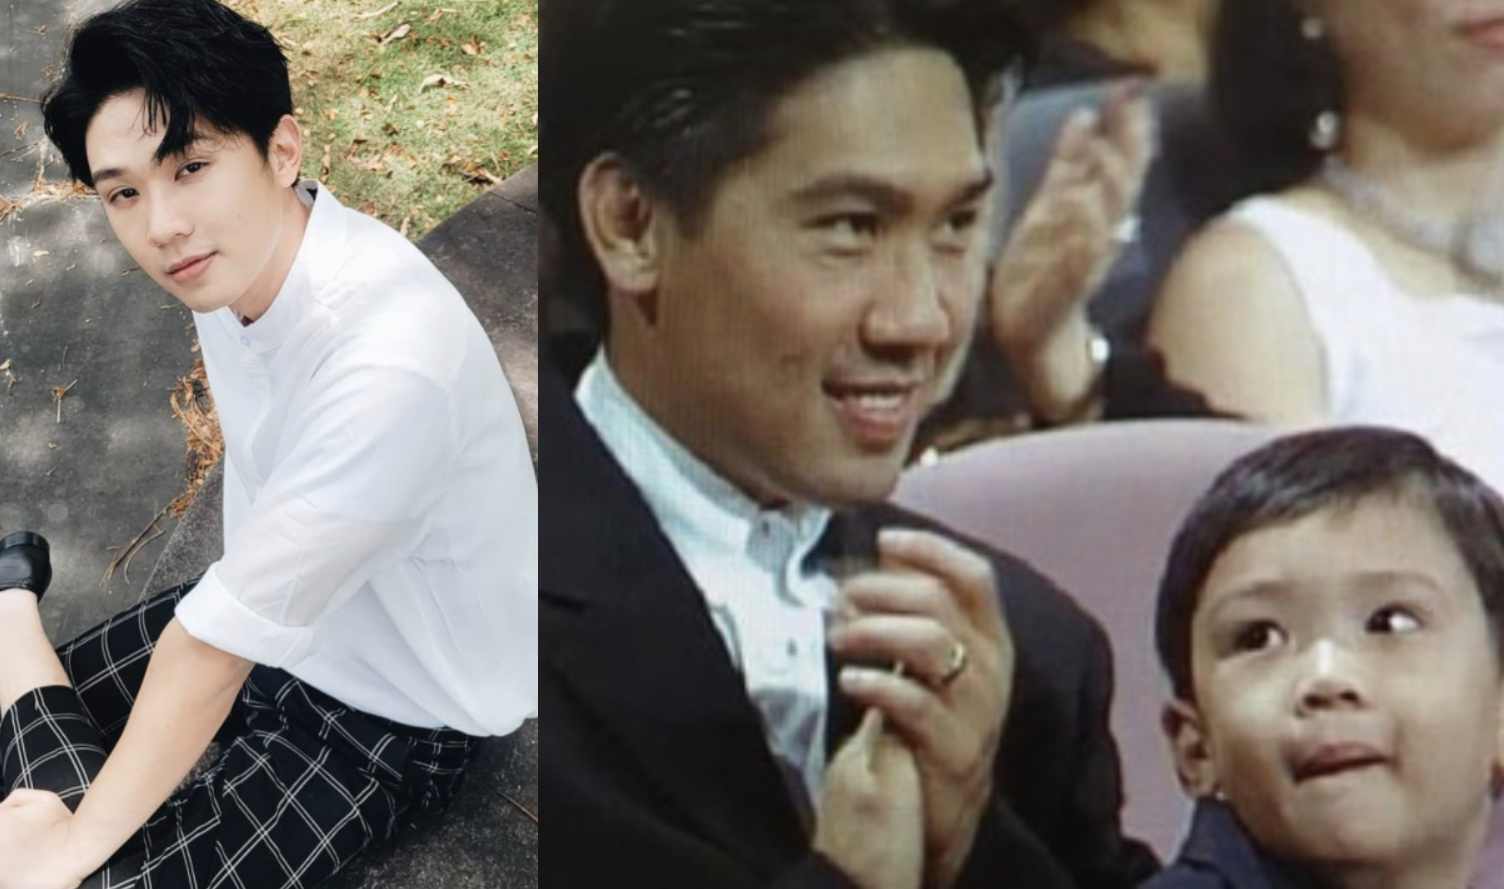 Edmund Chen Canvasses Star Awards Votes For Son Chen Yixi With This Adorable Throwback Photo